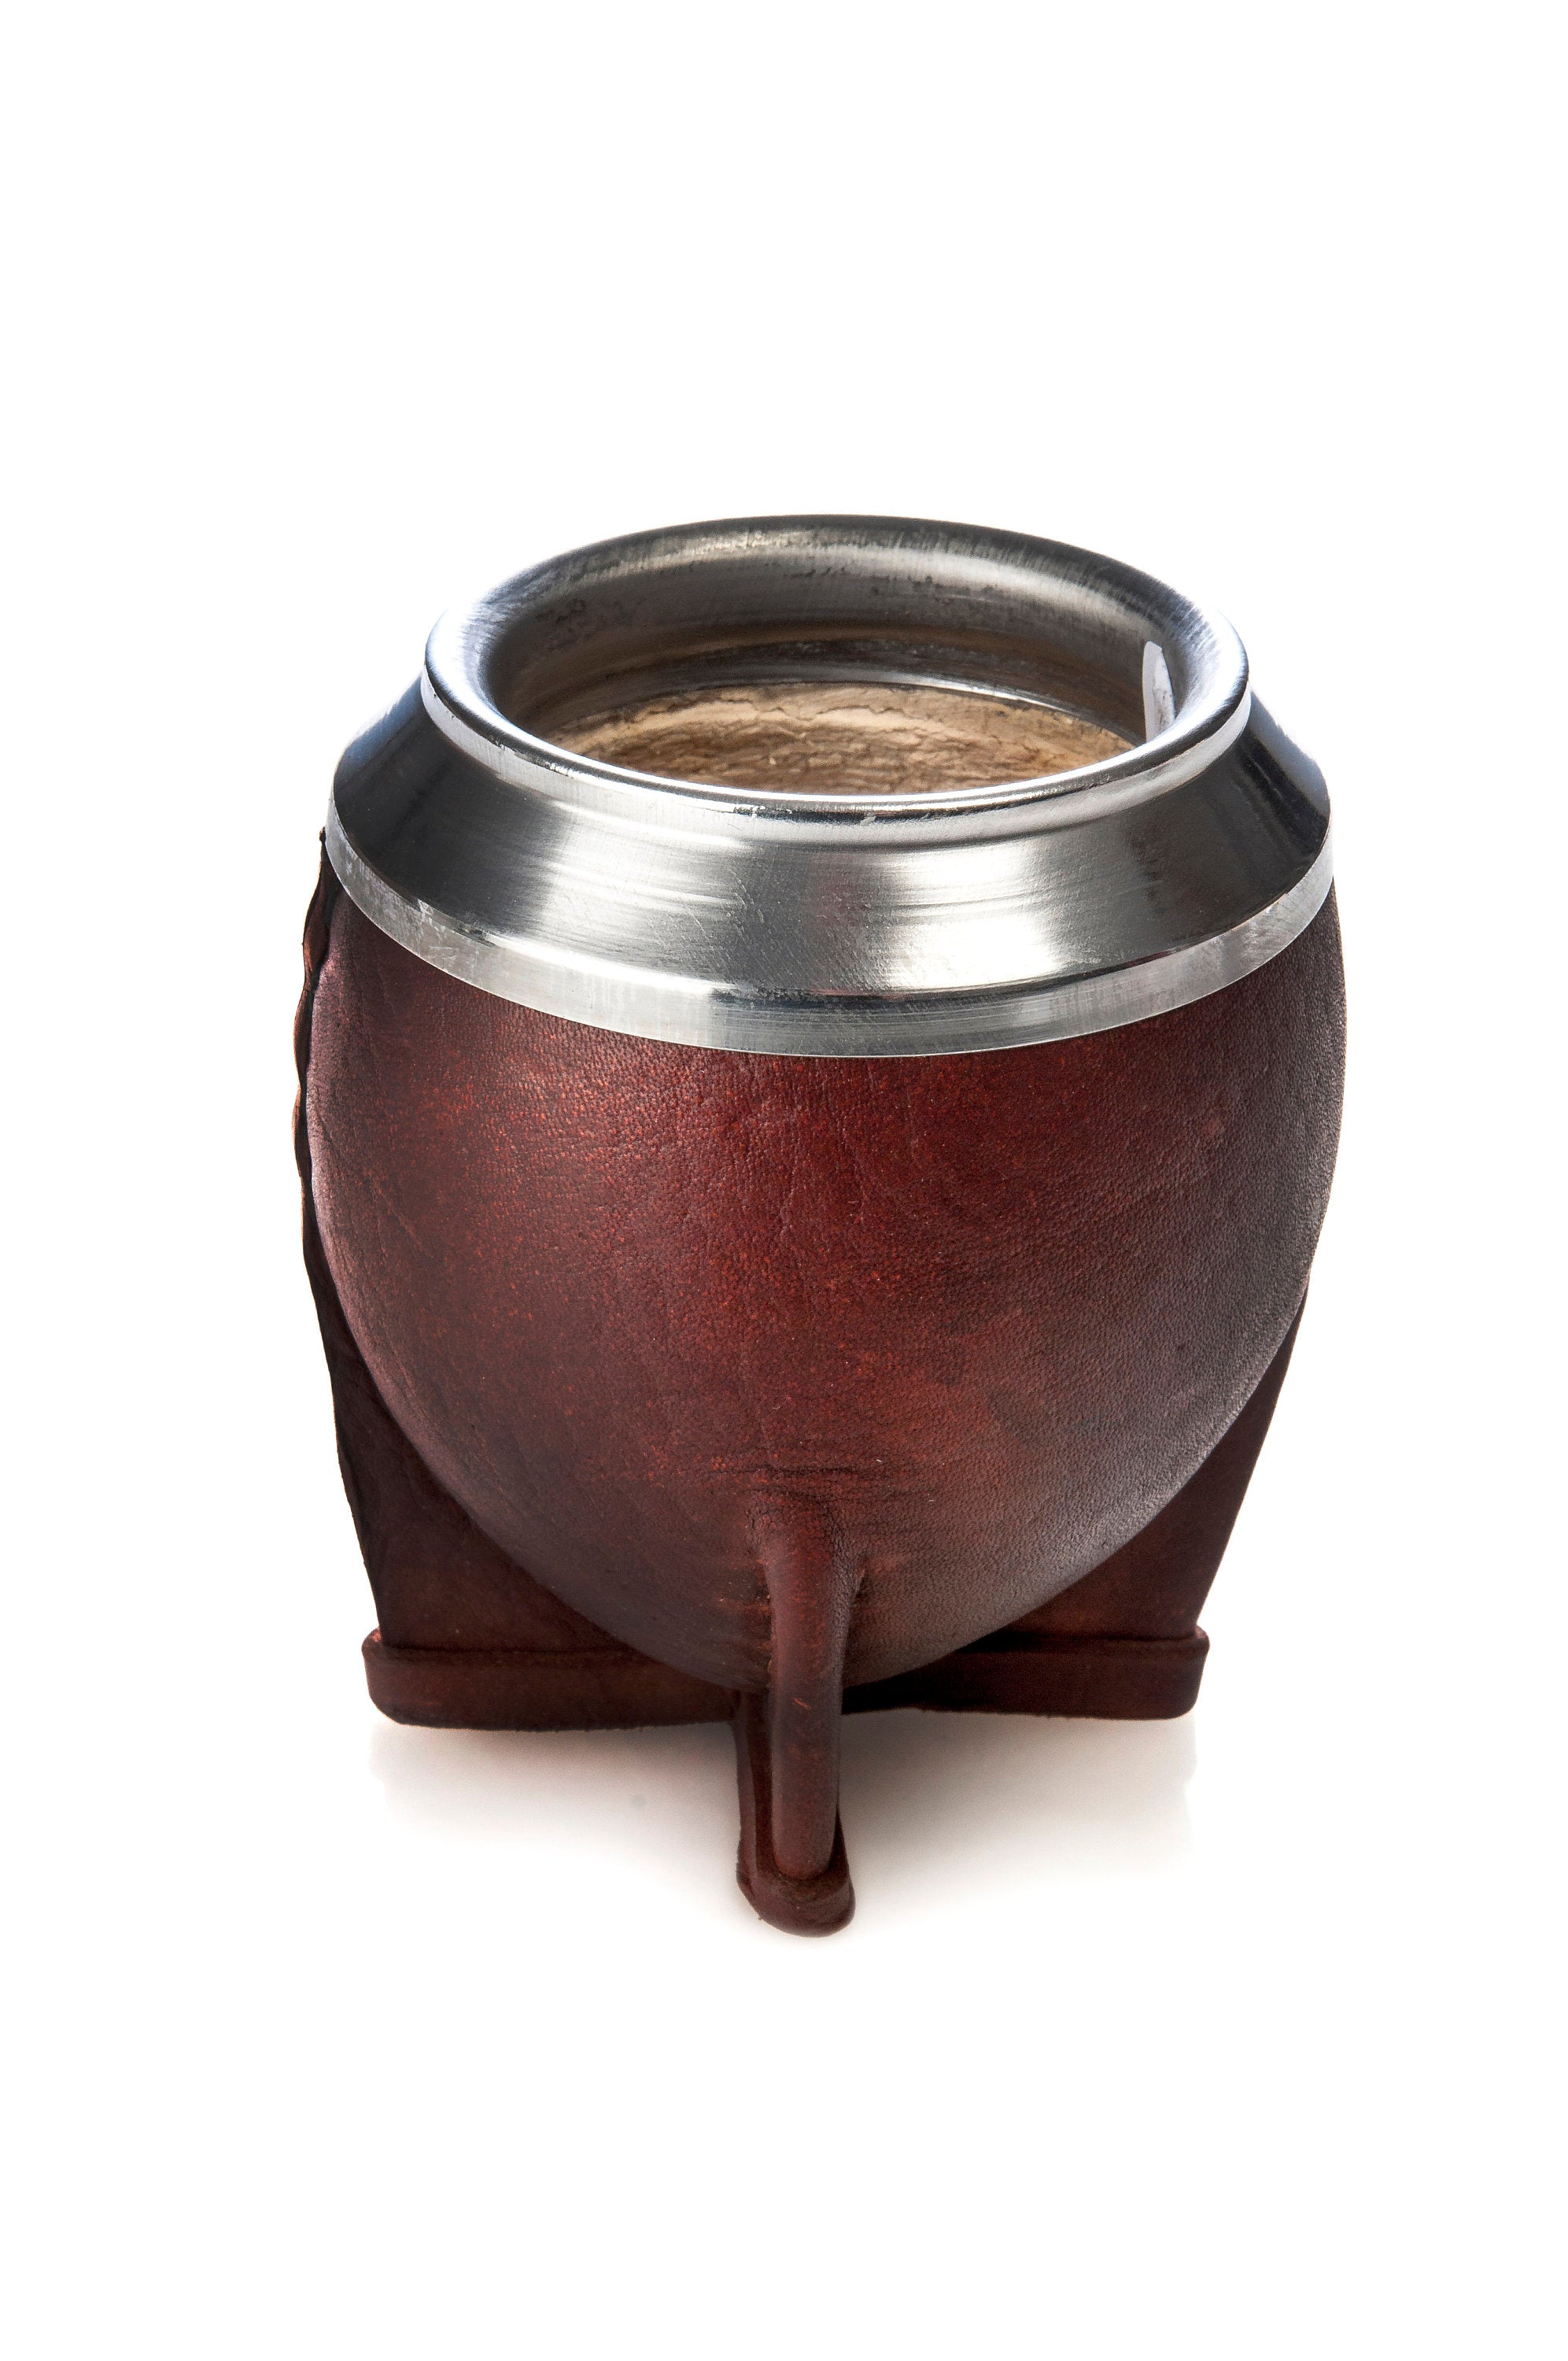 Gourd and Brown Leather Mate, Yerba Mate Gourd, Mate De Calabaza